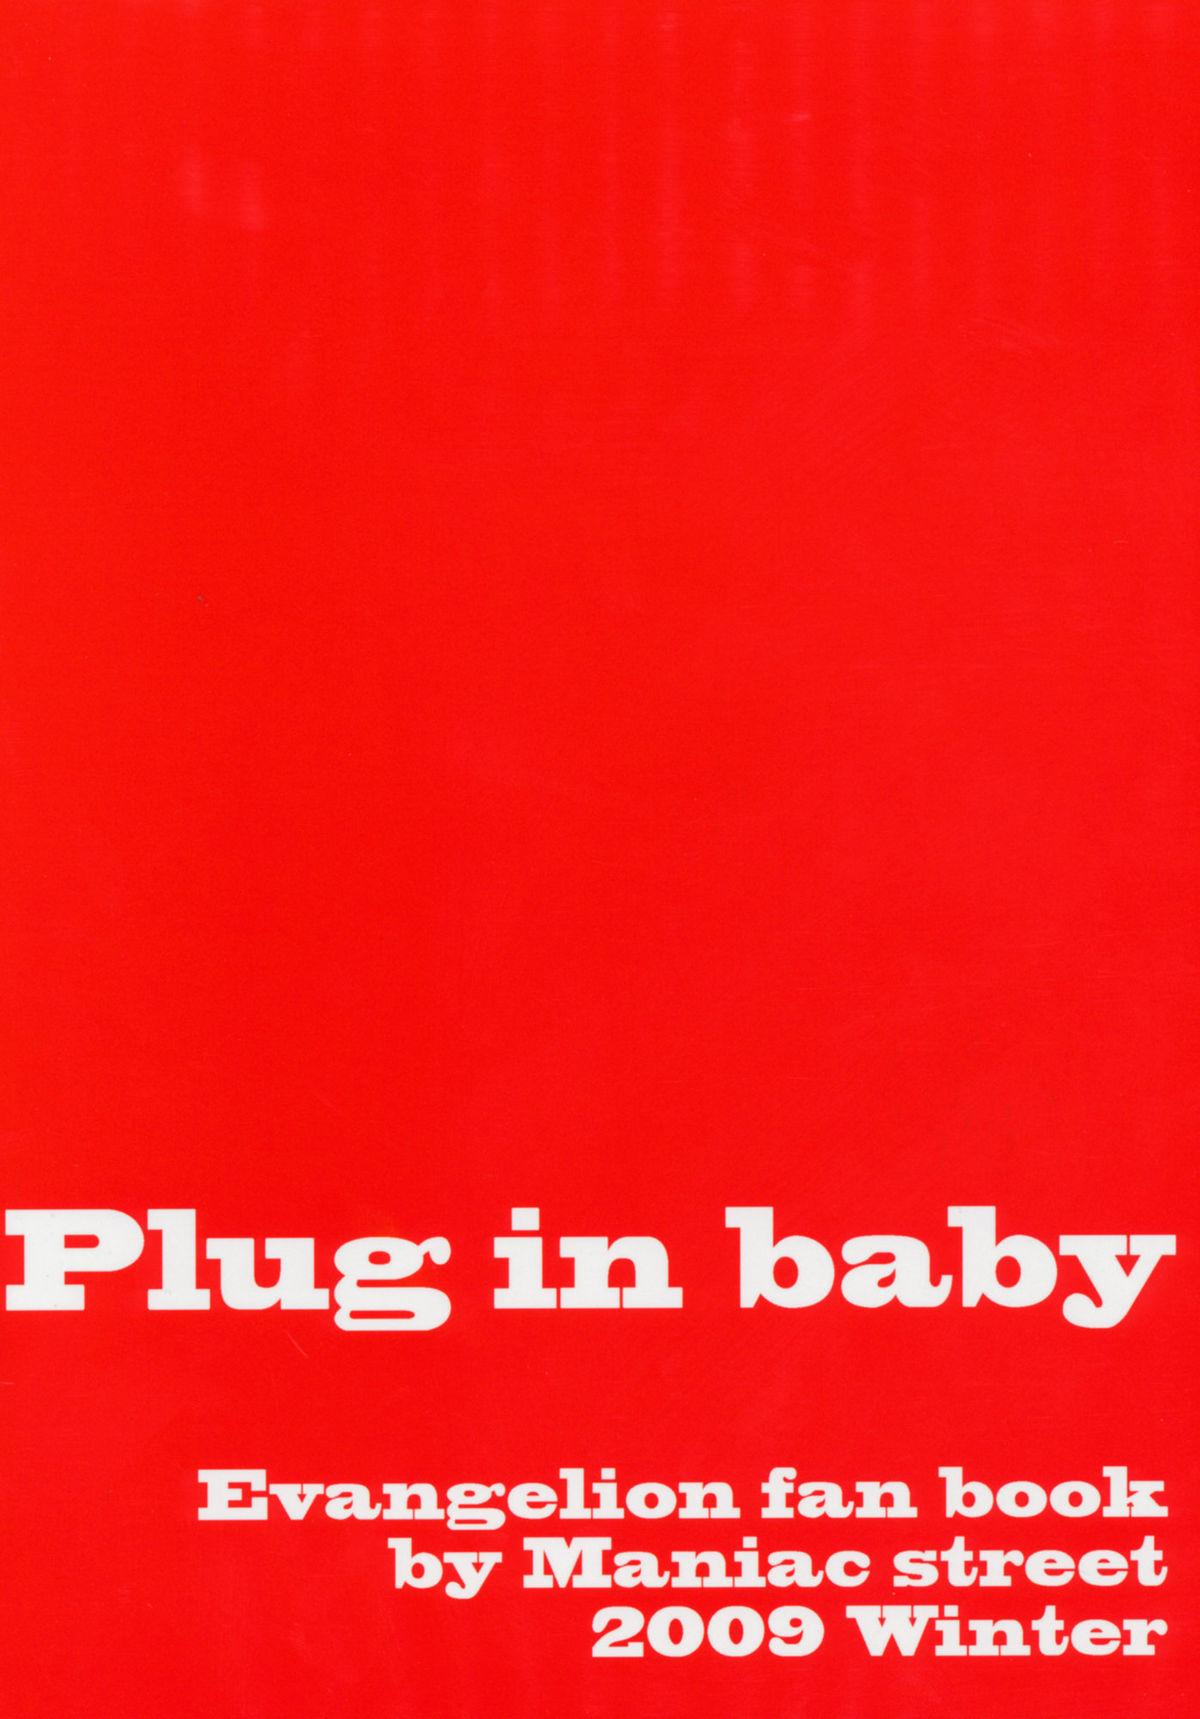 Plug in baby 1